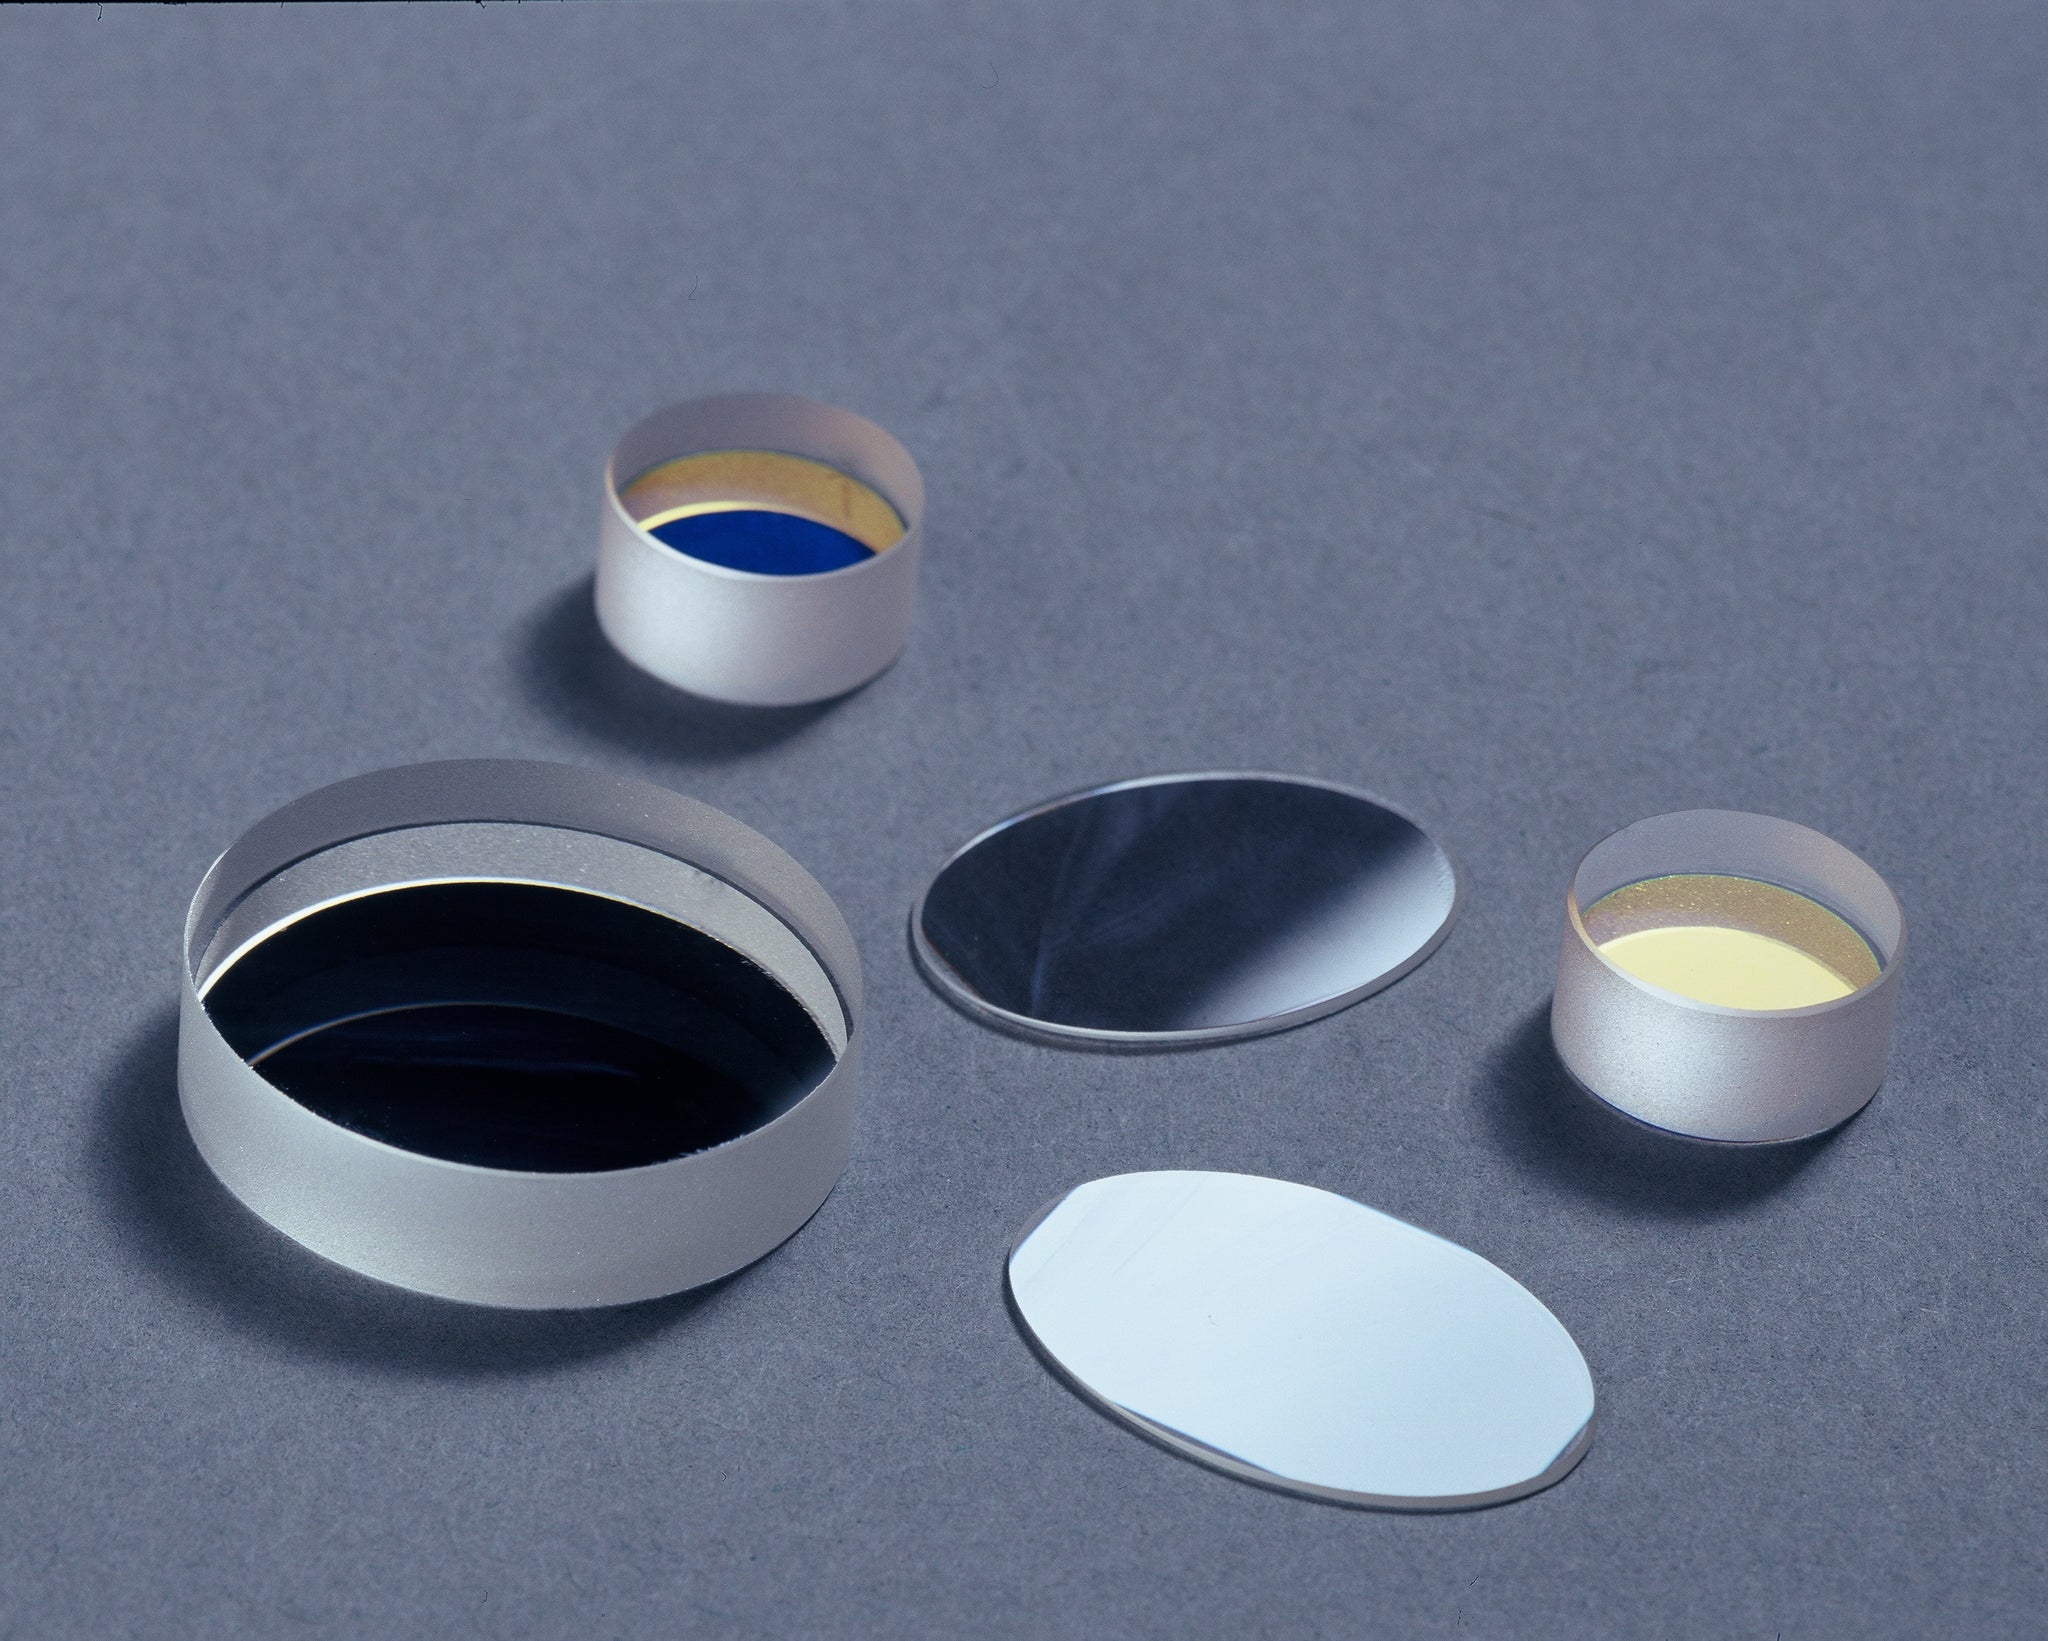 Dielectric Mirrors (Fused Silica, 12.7 mm diameter, 3mm thickness)